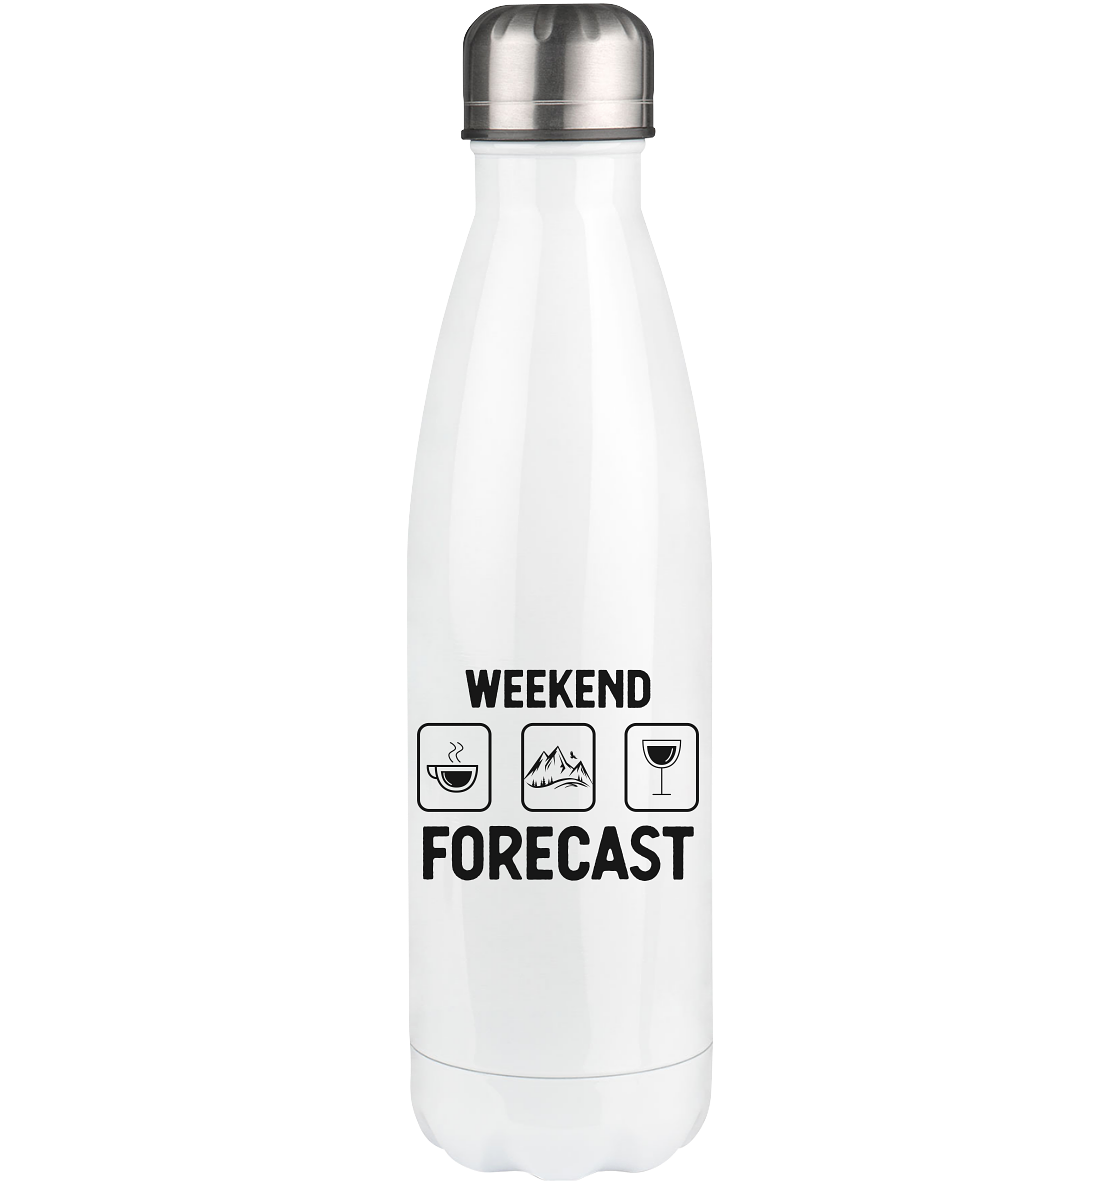 Weekend Forecast - Edelstahl Thermosflasche berge 500ml